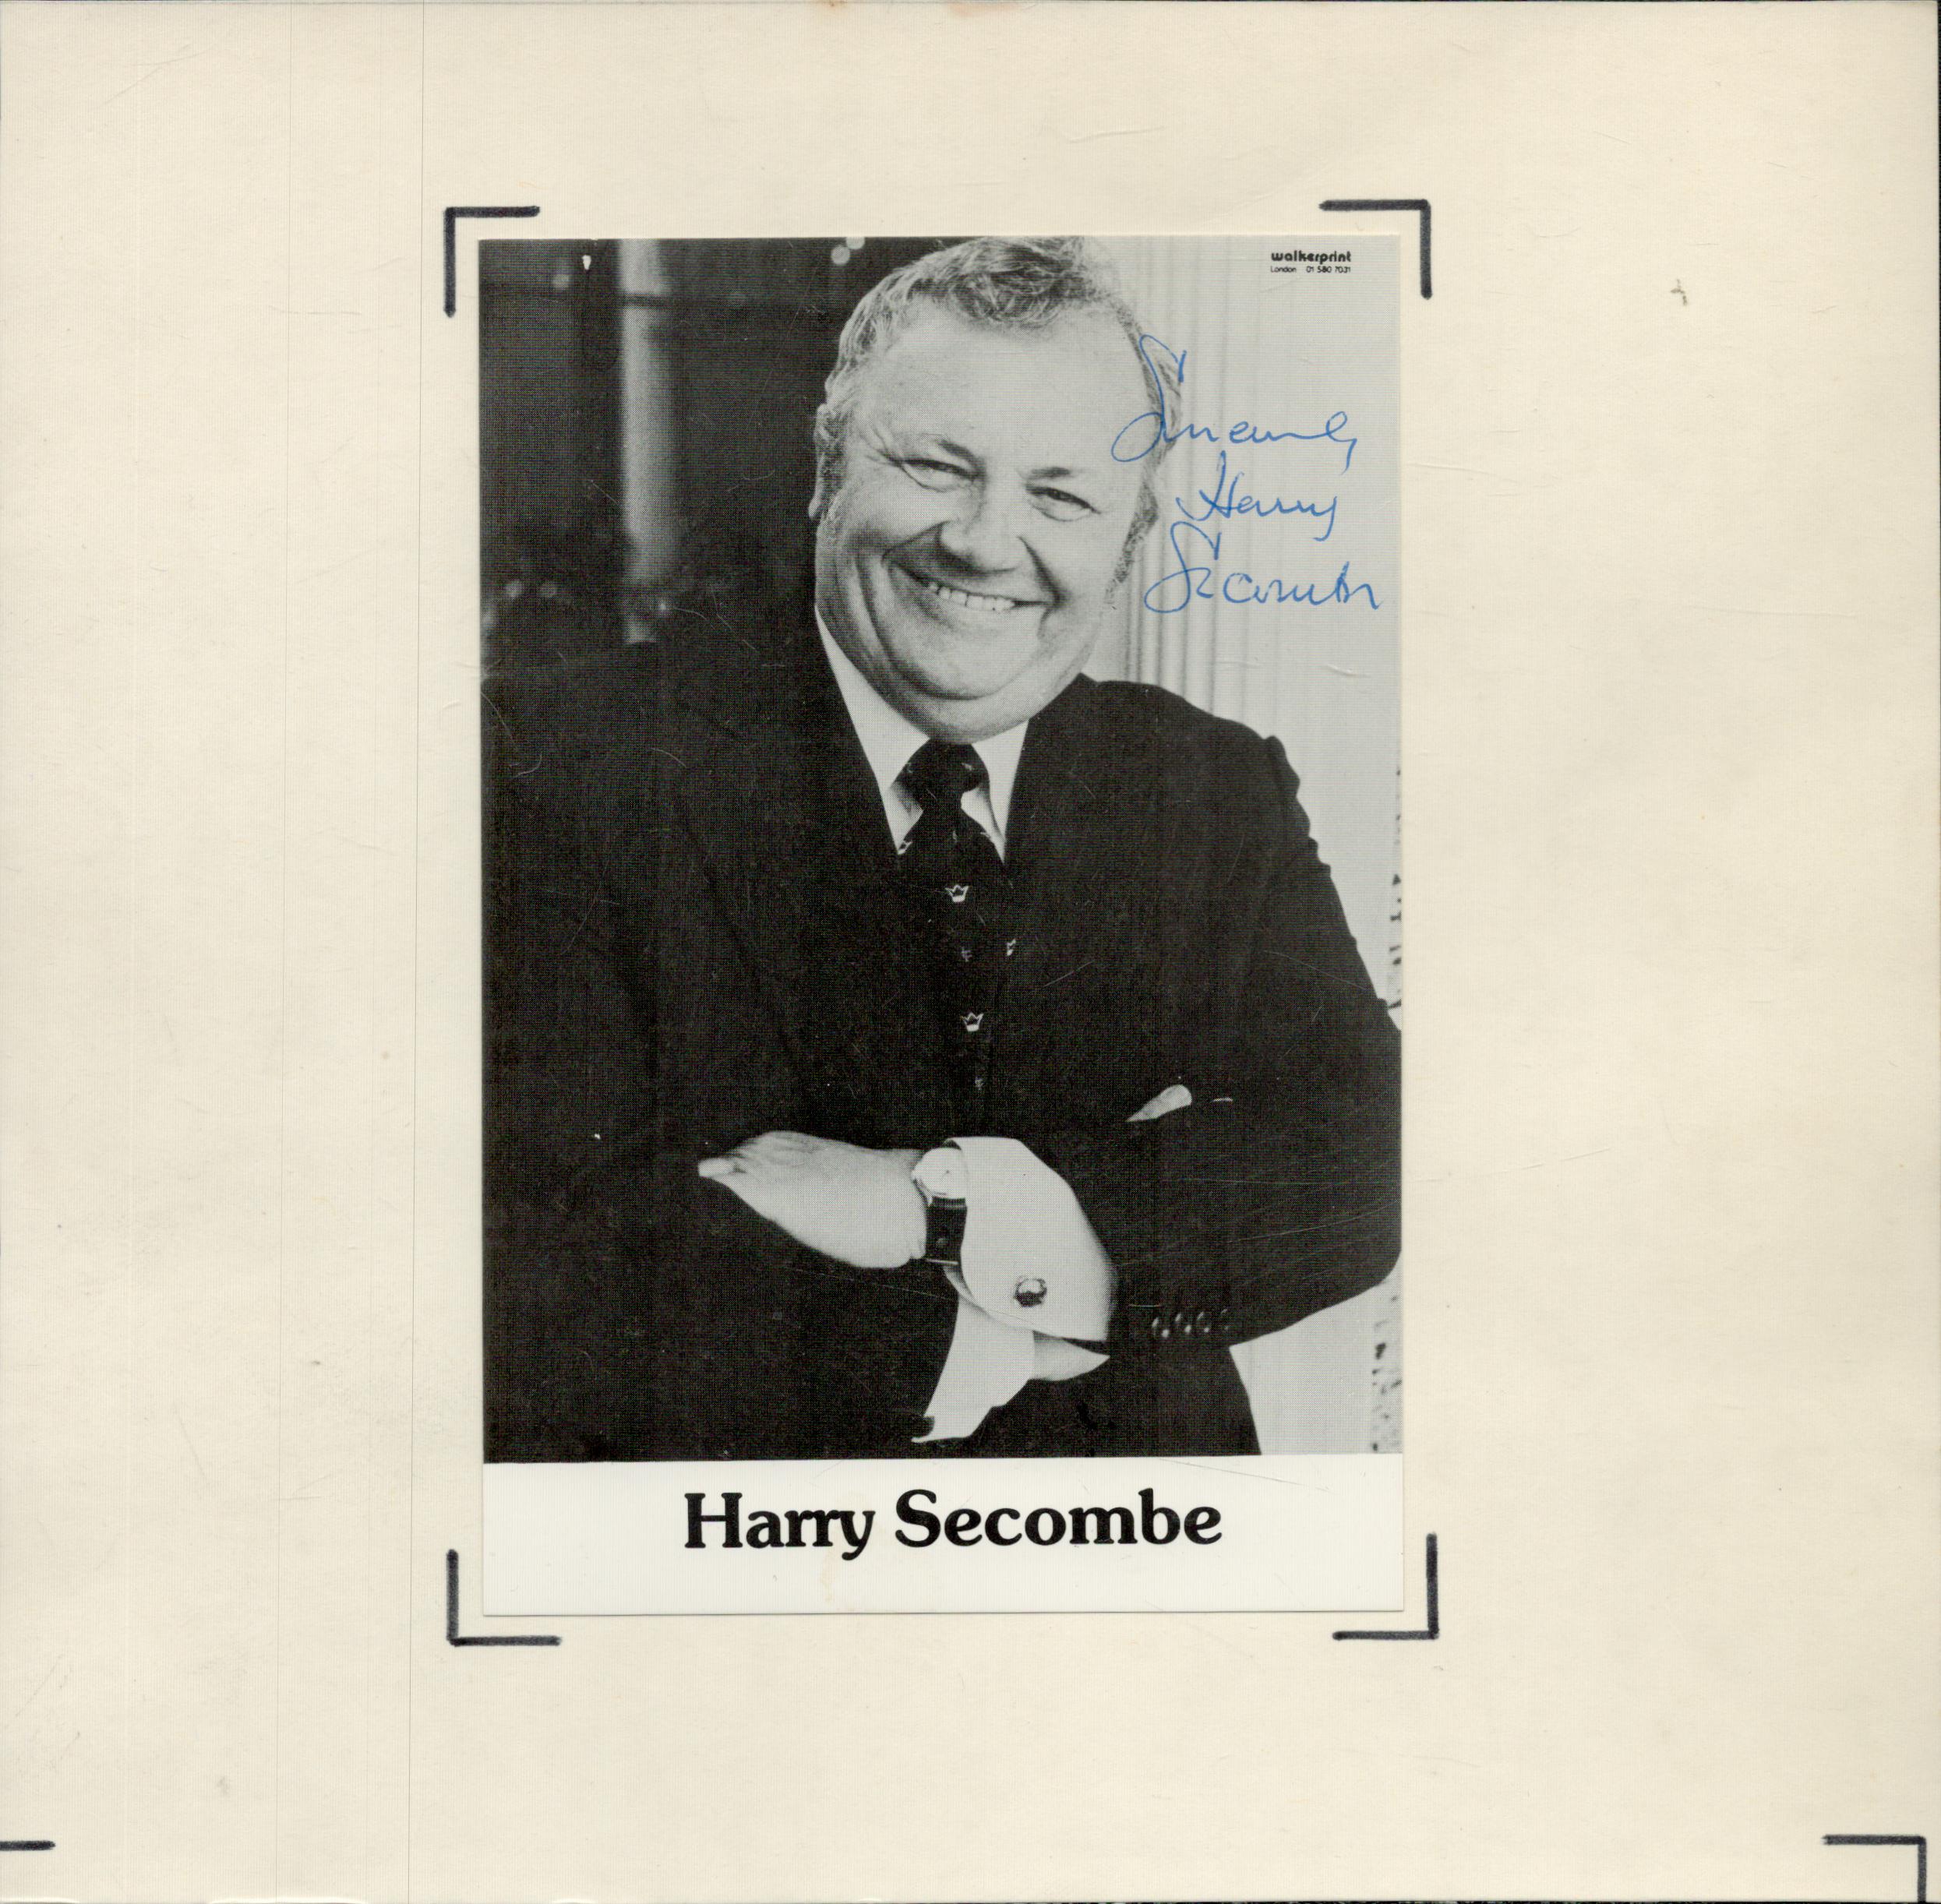 Sir Harry Secombe, CBE signed Promo Black and White Photo 6x4 Inch fixed onto card overall size 8.